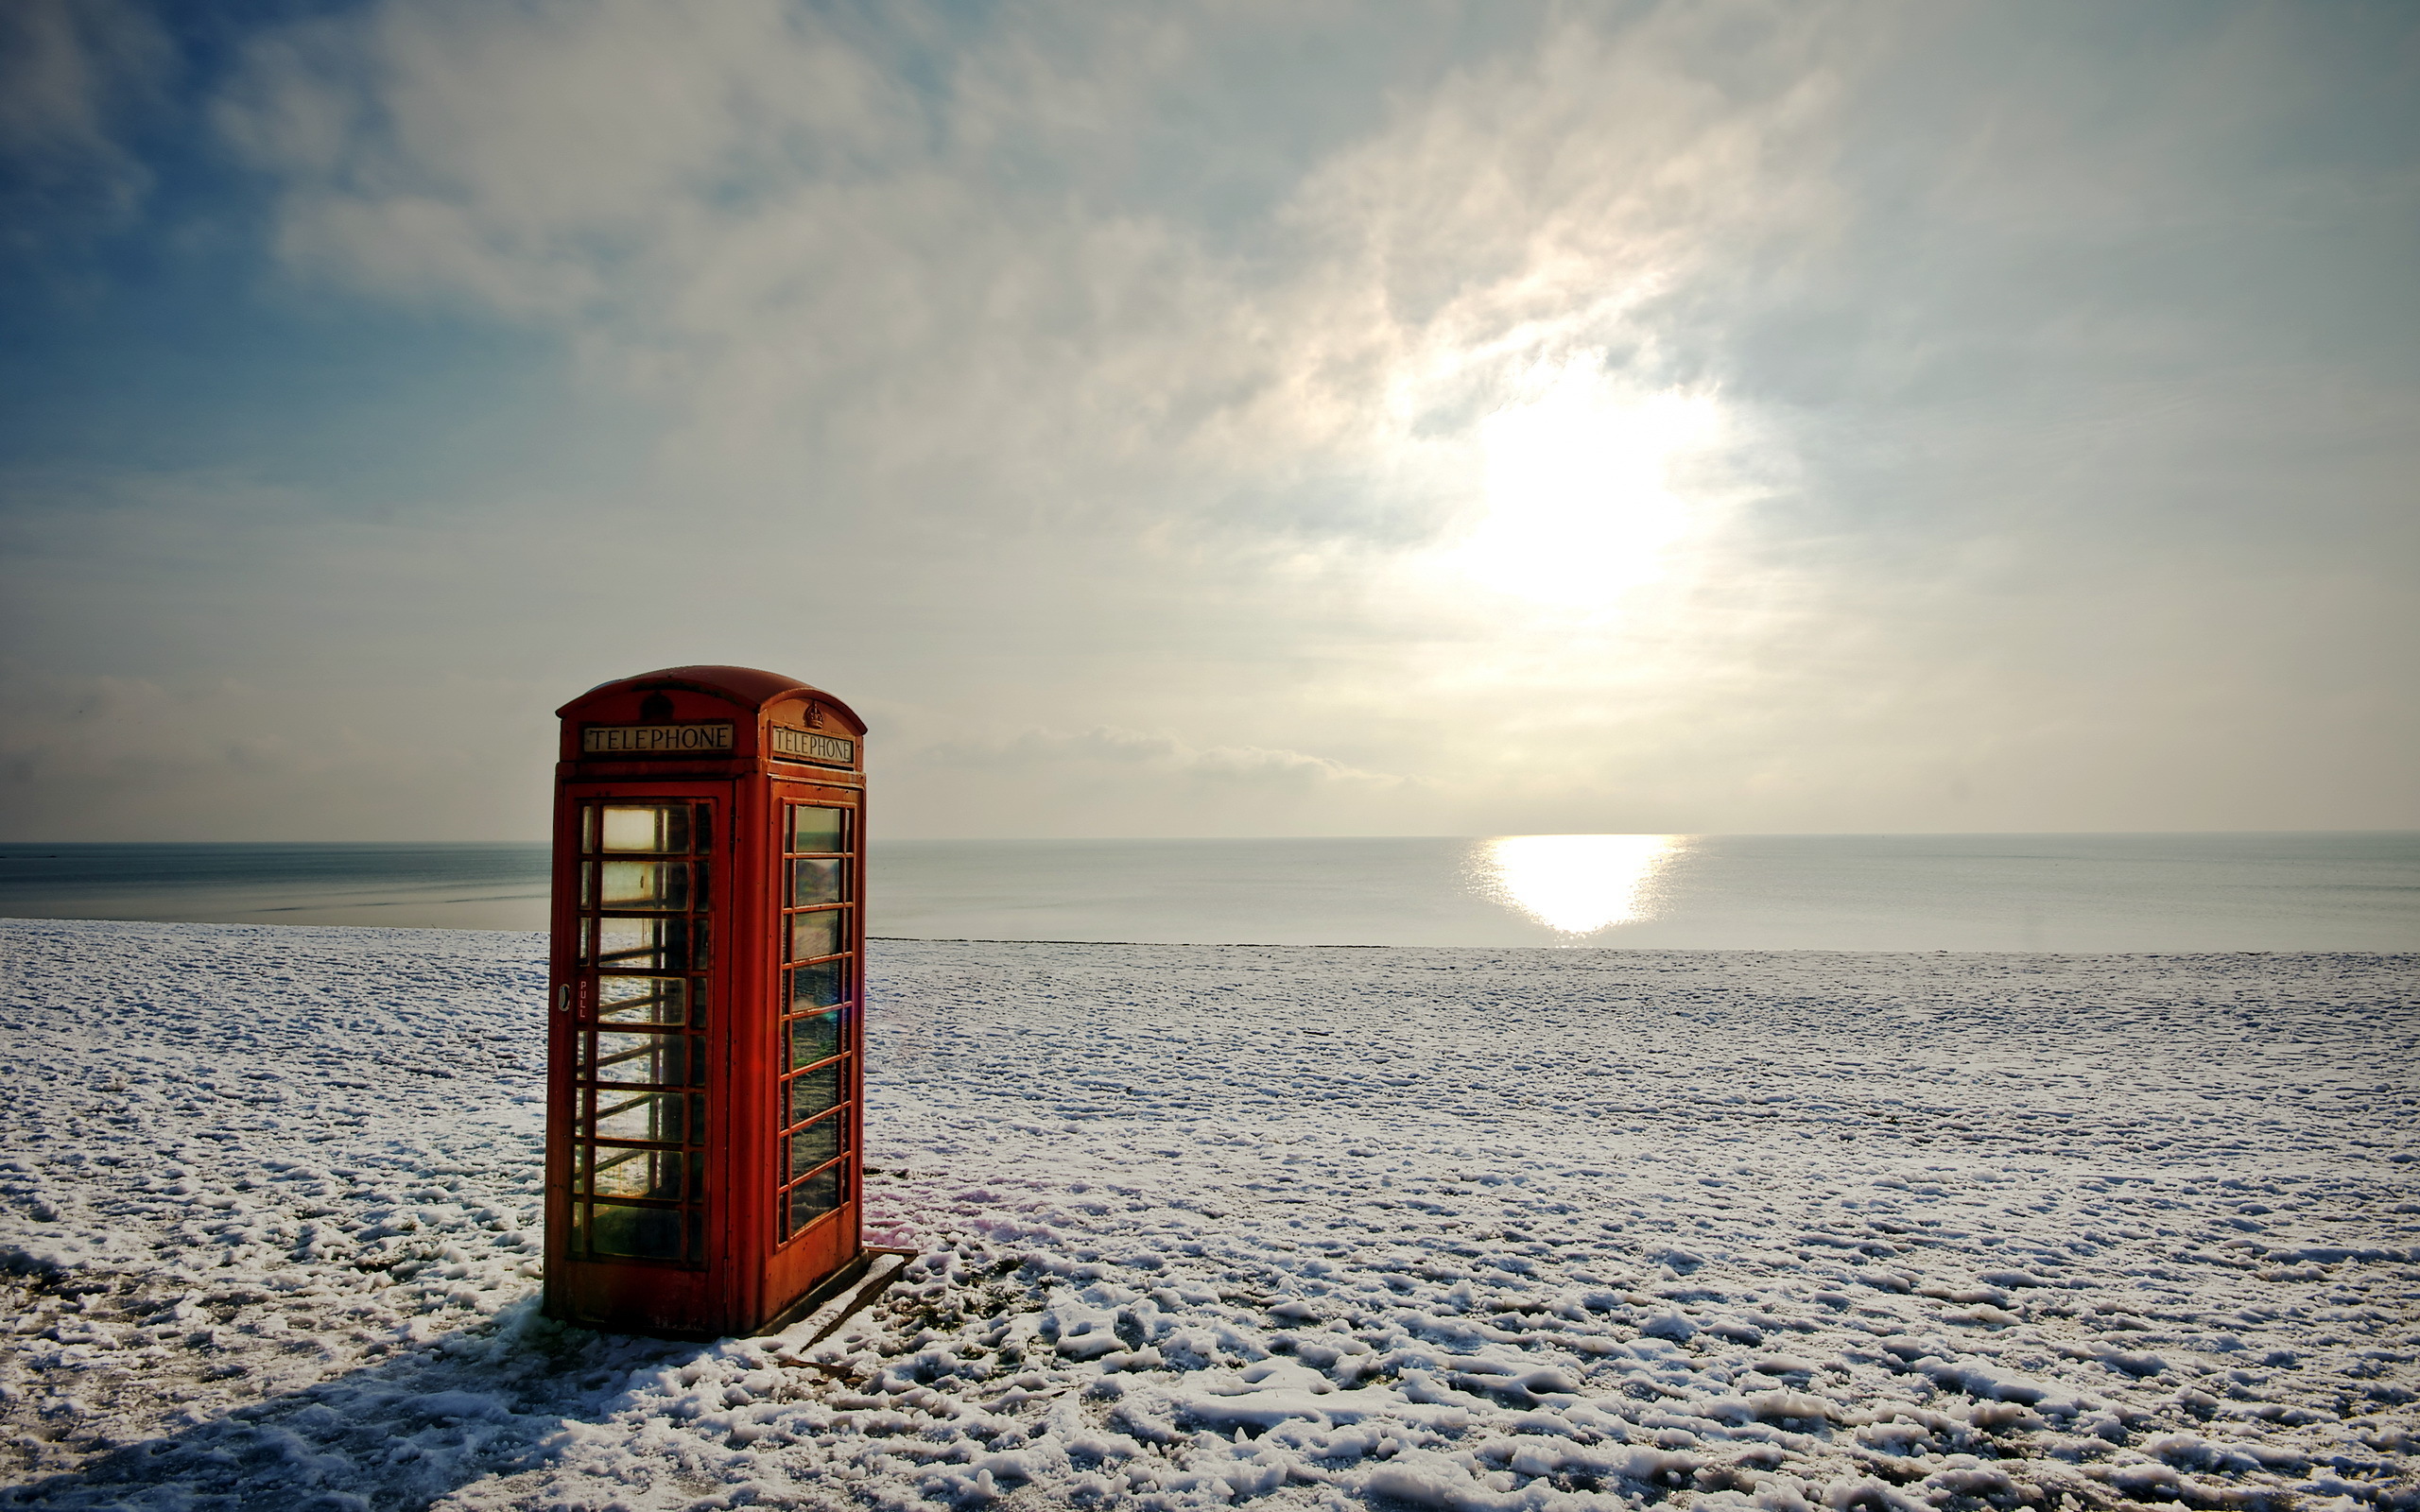 phone, Booth, Nature, Landscapes, Beaches, Ocean, Sea, Telephone, Situation, Humor, Sky, Man made Wallpaper